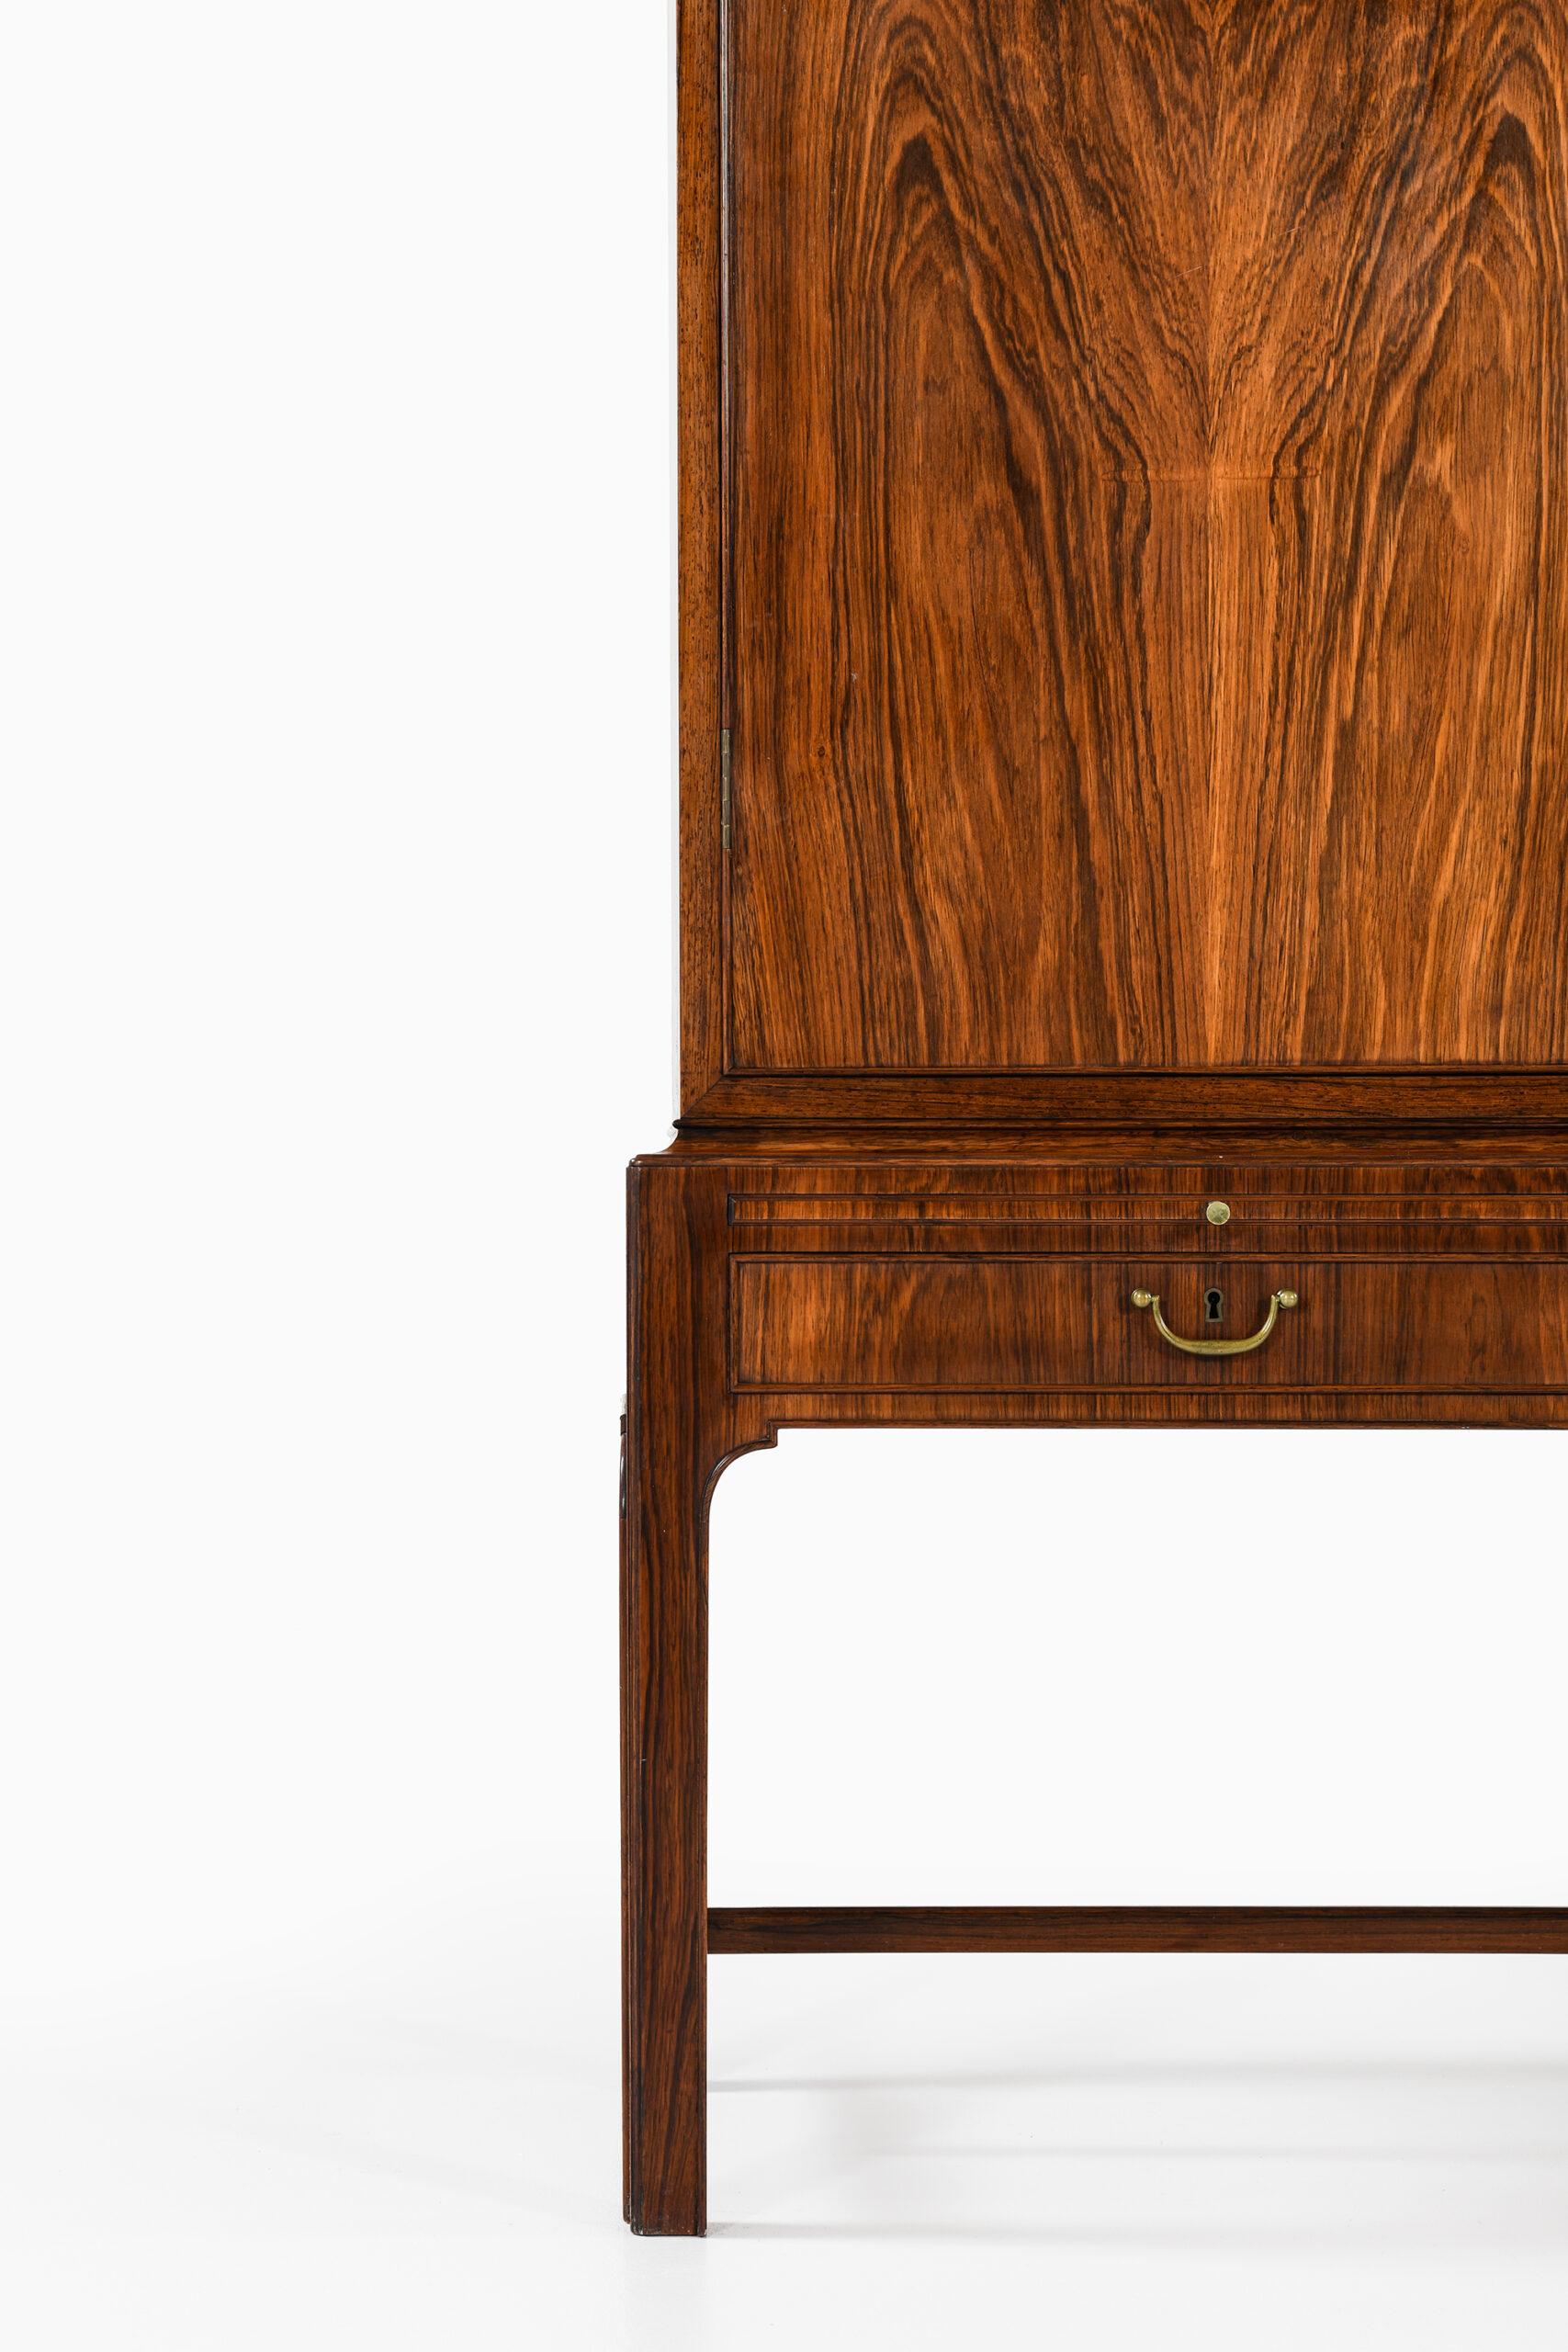 Very rare master cabinet in the style of Kaare Klint. Produced by cabinetmaker C.B. Hansen in Denmark.